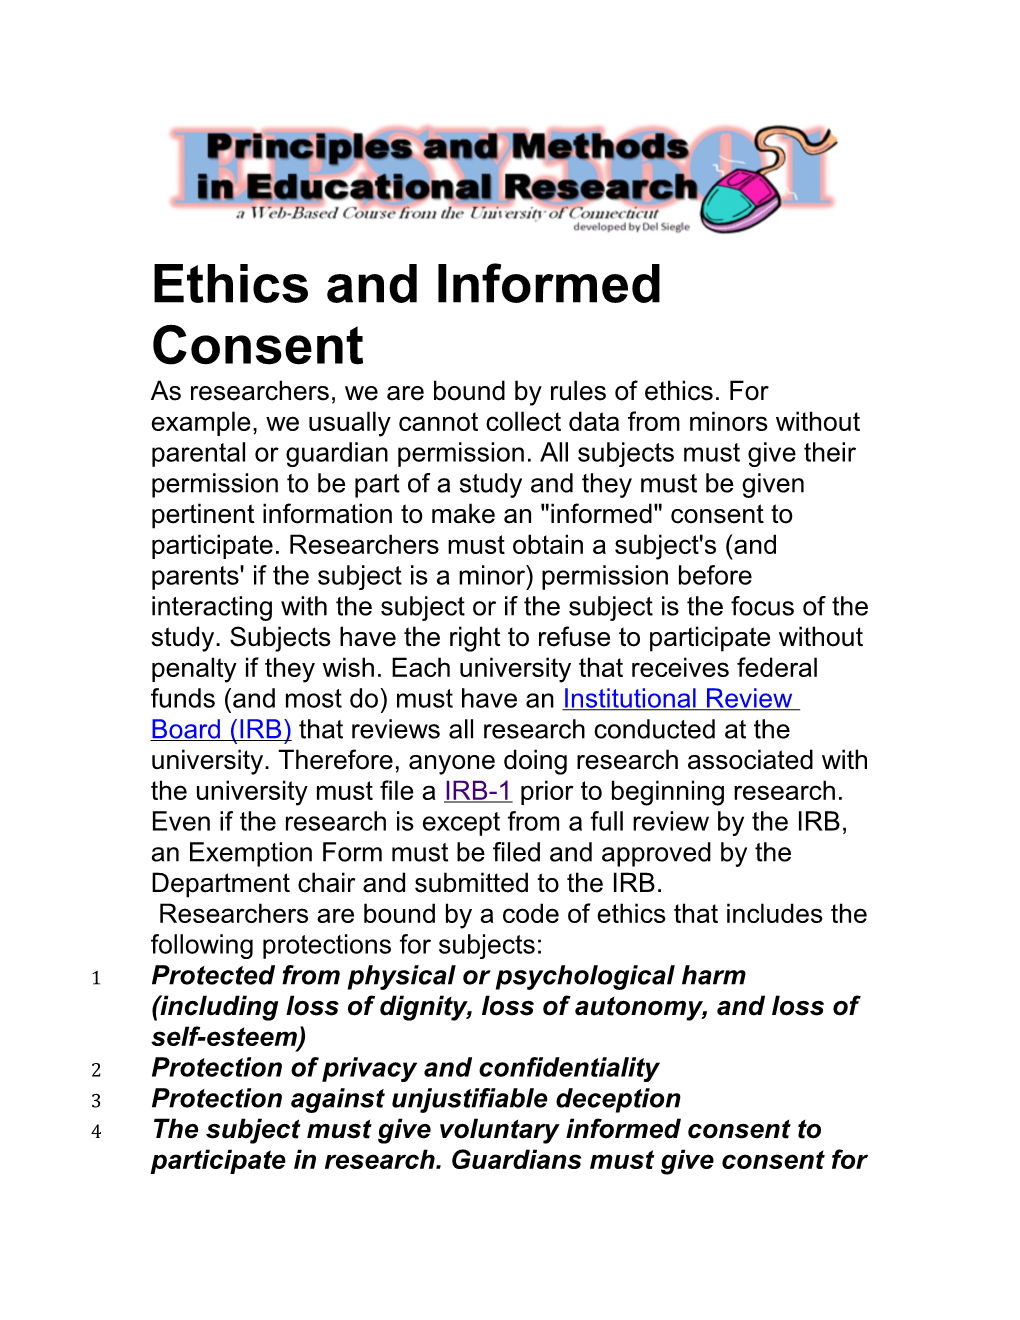 Ethics and Informed Consent